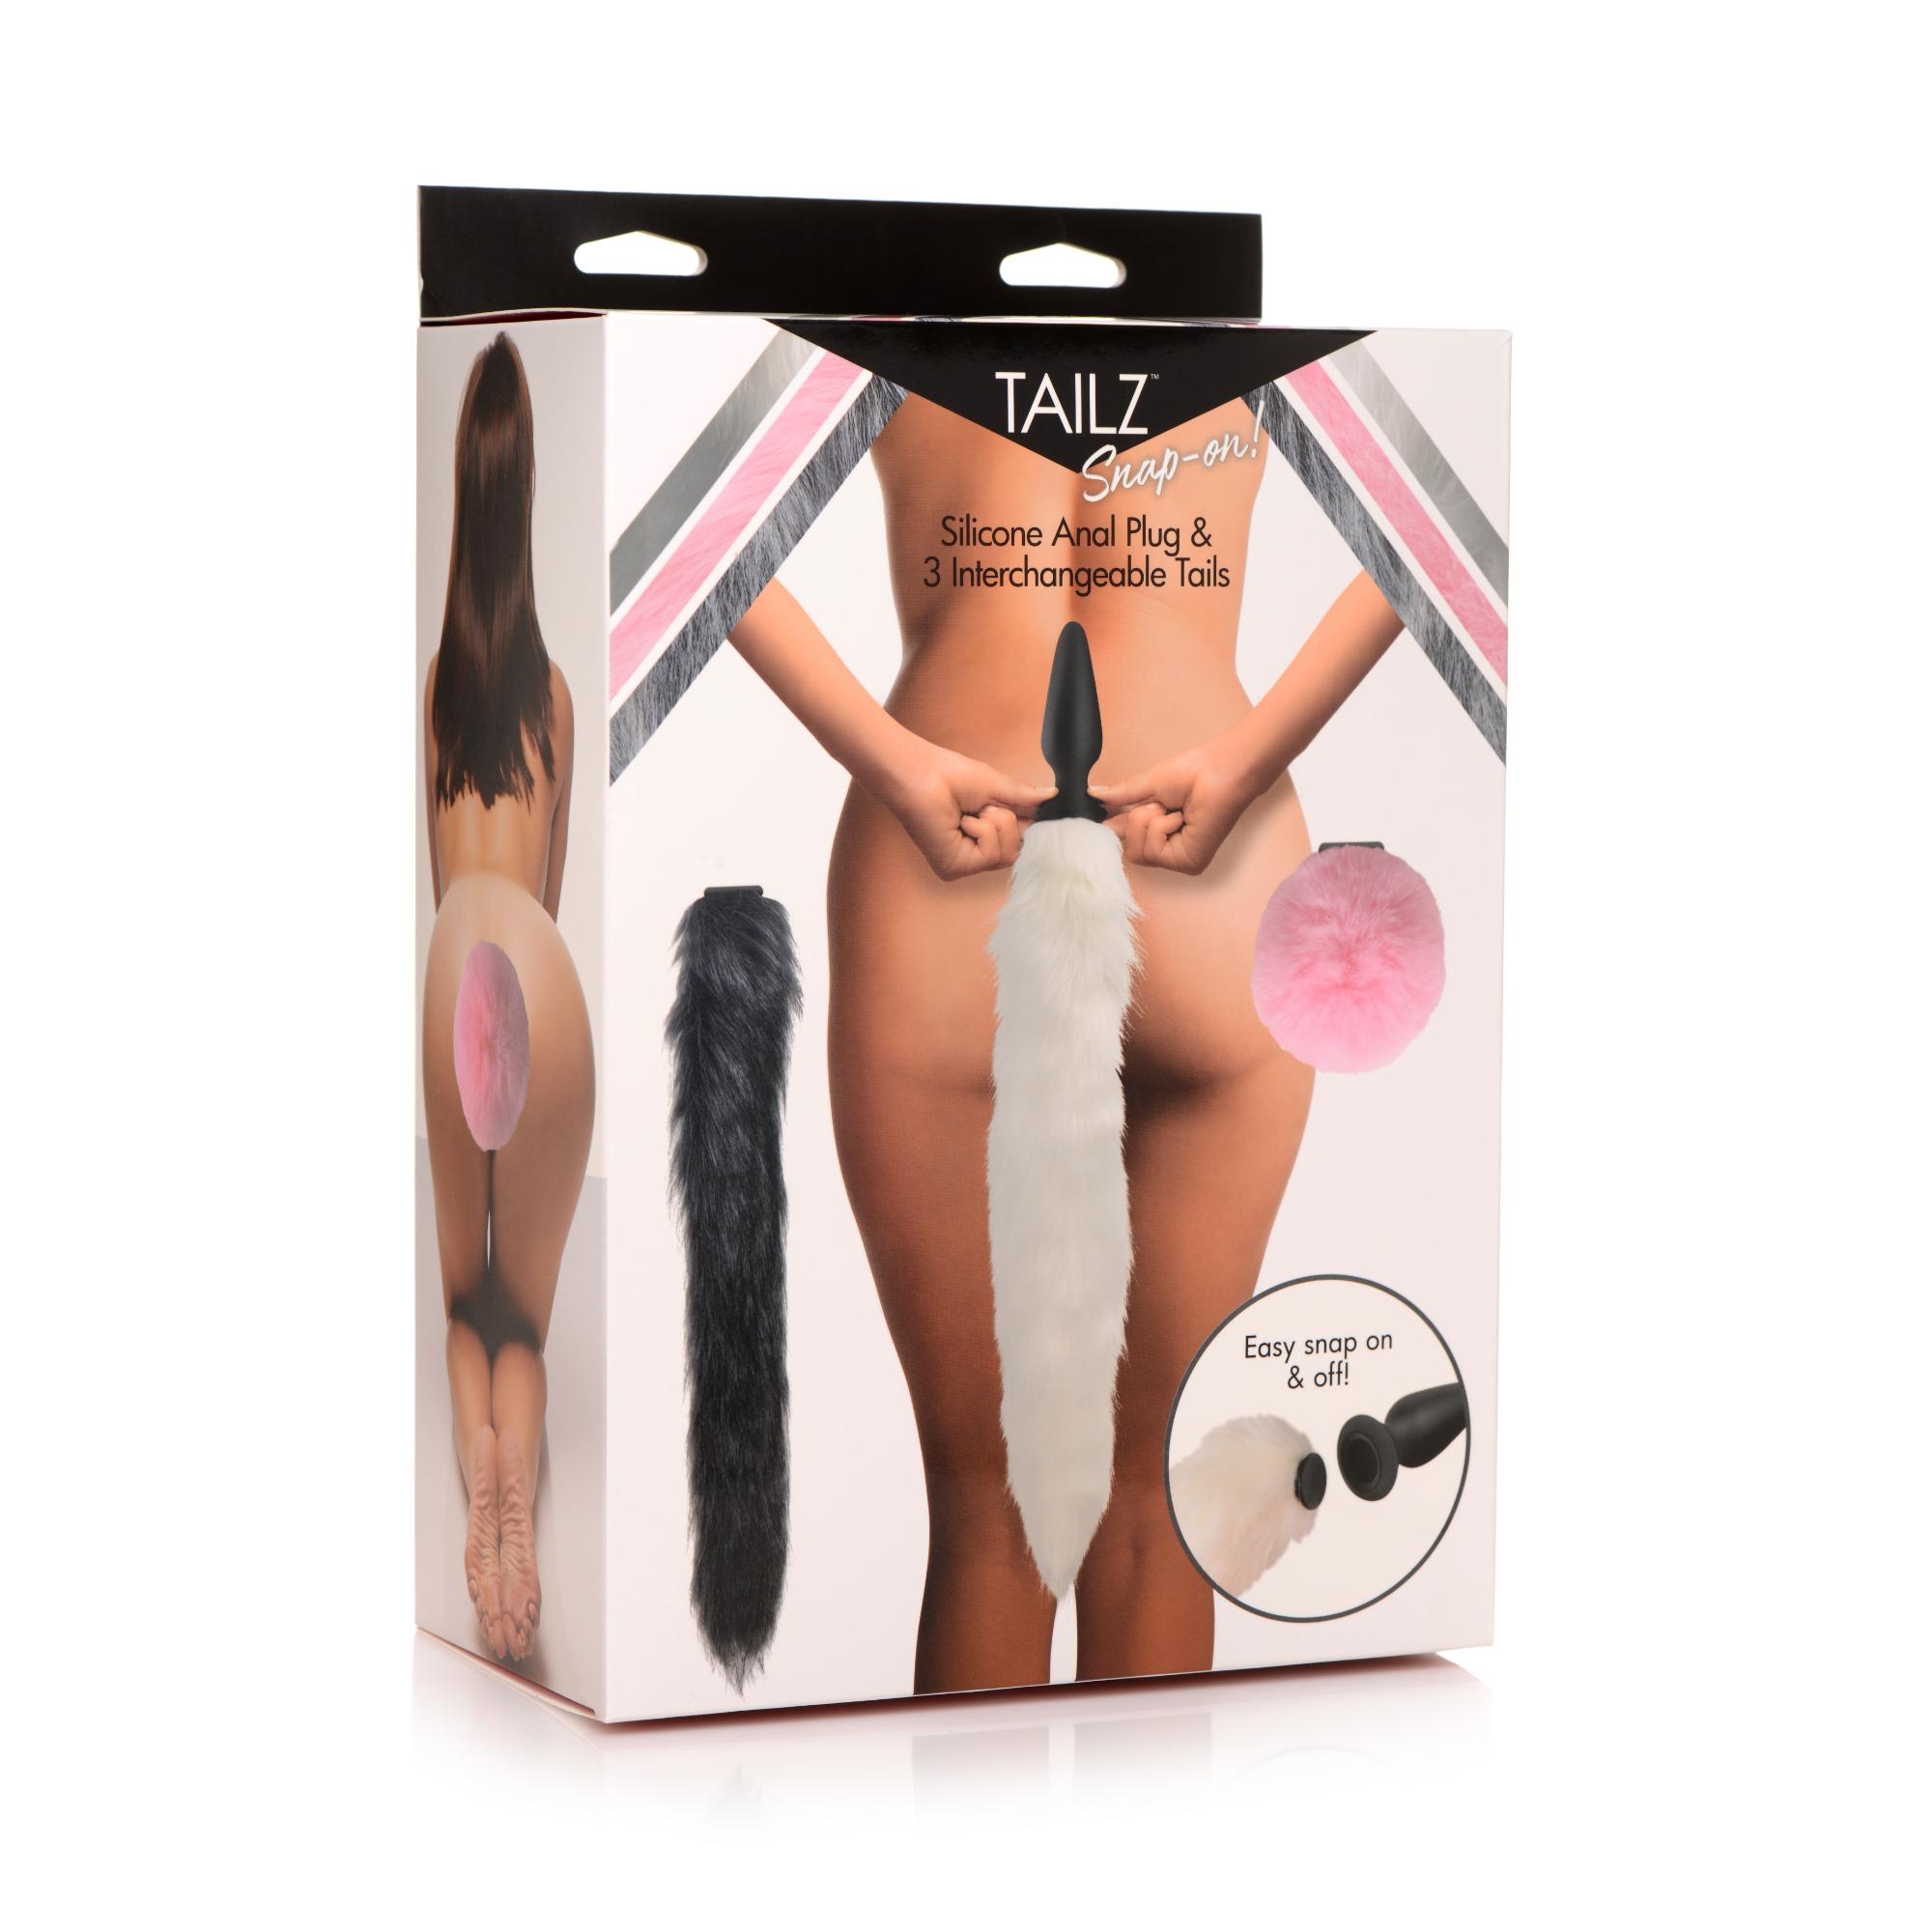 Tailz Silicone Anal Plug & 3 Interchangeable Tails